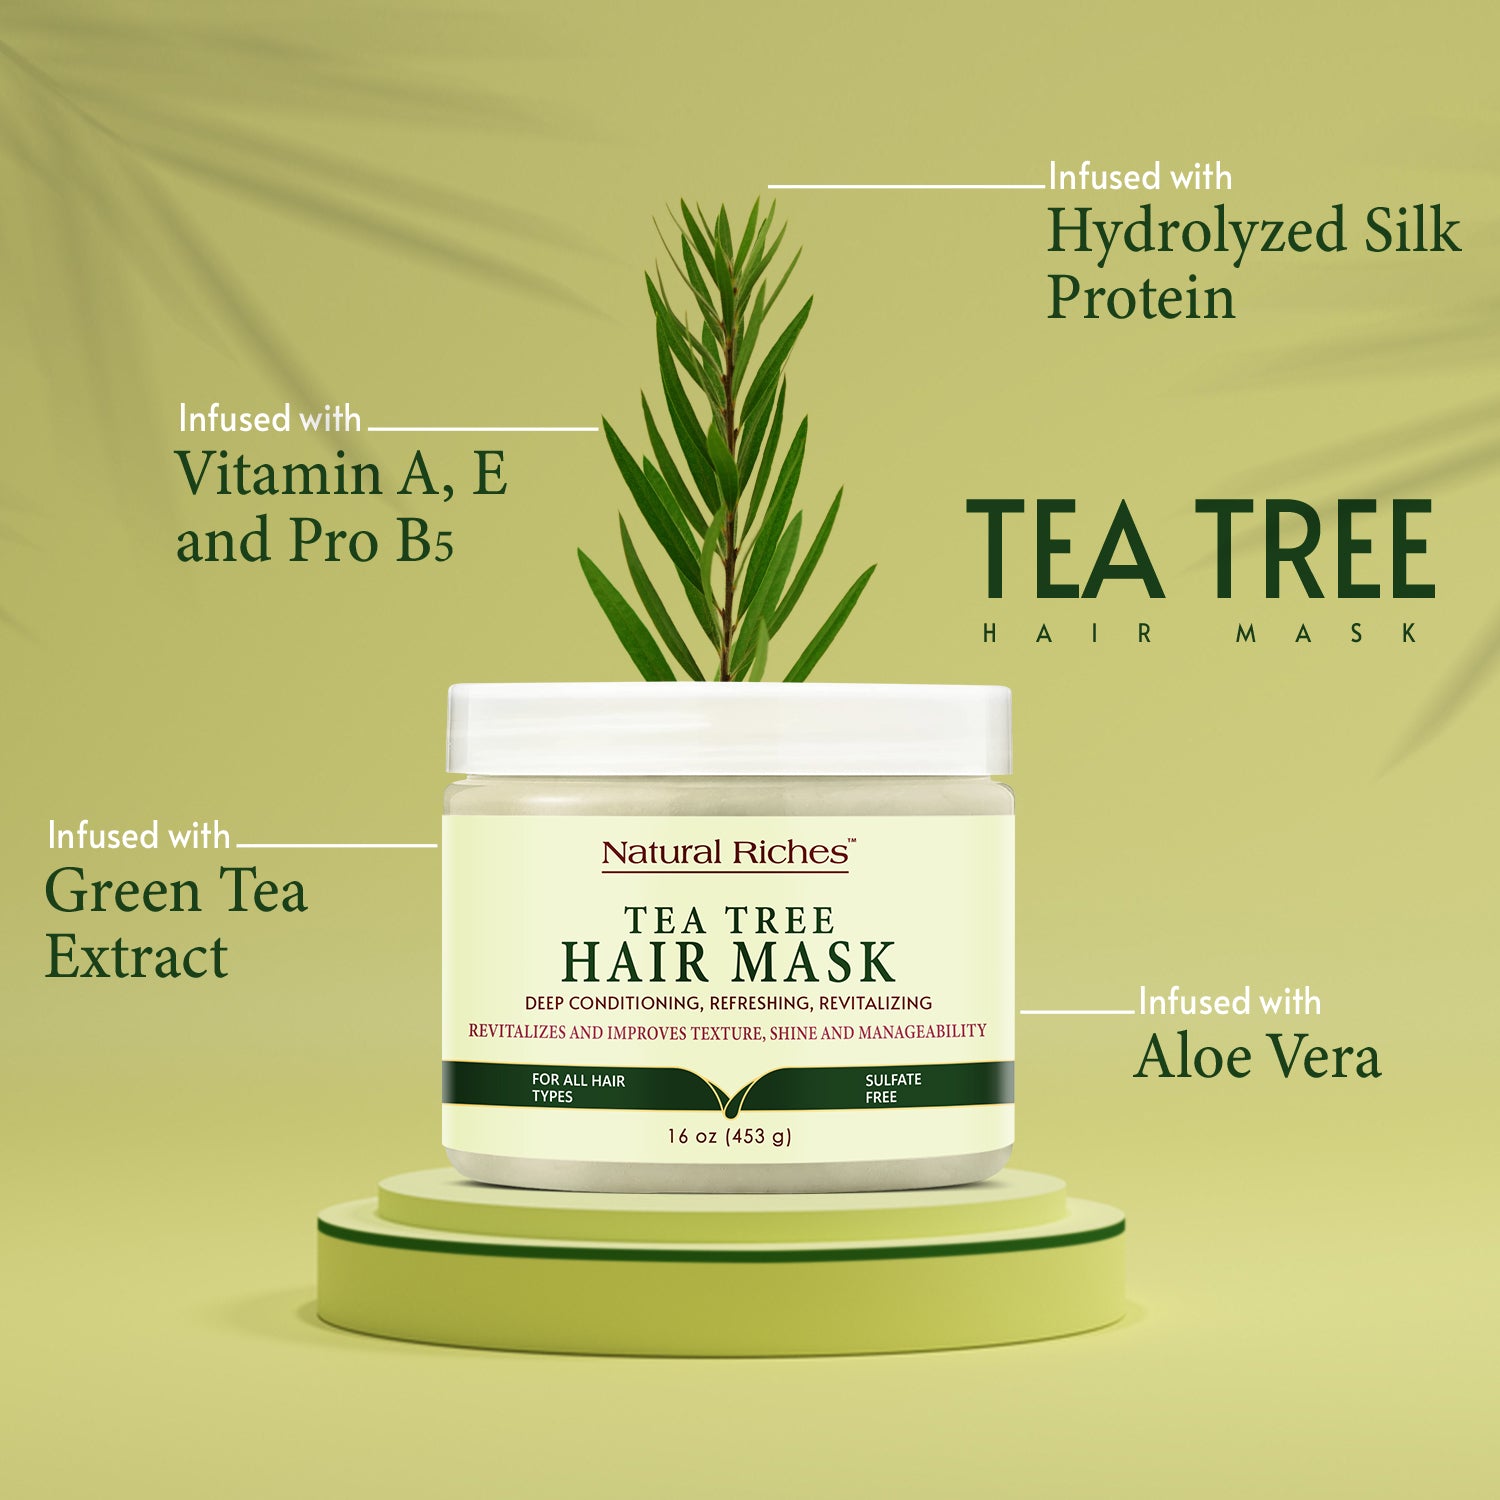 Tea tree hair mask by Natural Riches